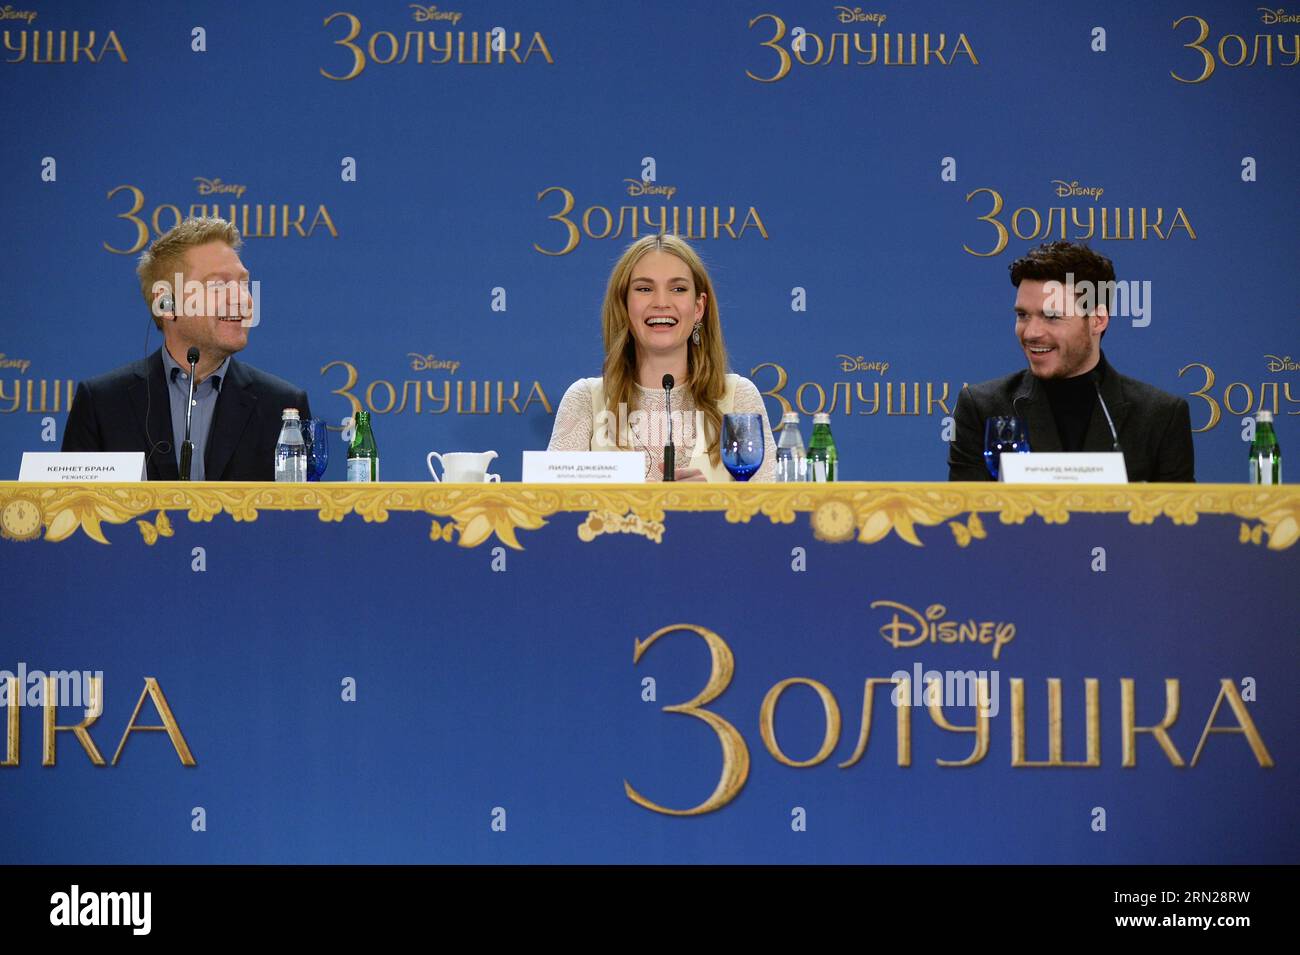 (150217) -- MOSCOW, Feb. 17, 2015 -- Director Kenneth Branagh, actress Lily James and actor Richard Madden (from L to R) attend a press conference during the premiere of Disney s new movie Cinderella in Moscow, Russia, on Feb. 17, 2015. ) RUSSIA-MOSCOW-MOVIE-CINDERELLA-PREMIERE PavelxBednyakov PUBLICATIONxNOTxINxCHN   Moscow Feb 17 2015 Director Kenneth Branagh actress Lily James and Actor Richard Madden from l to r attend a Press Conference during The Premiere of Disney S New Movie Cinderella in Moscow Russia ON Feb 17 2015 Russia Moscow Movie Cinderella Premiere  PUBLICATIONxNOTxINxCHN Stock Photo